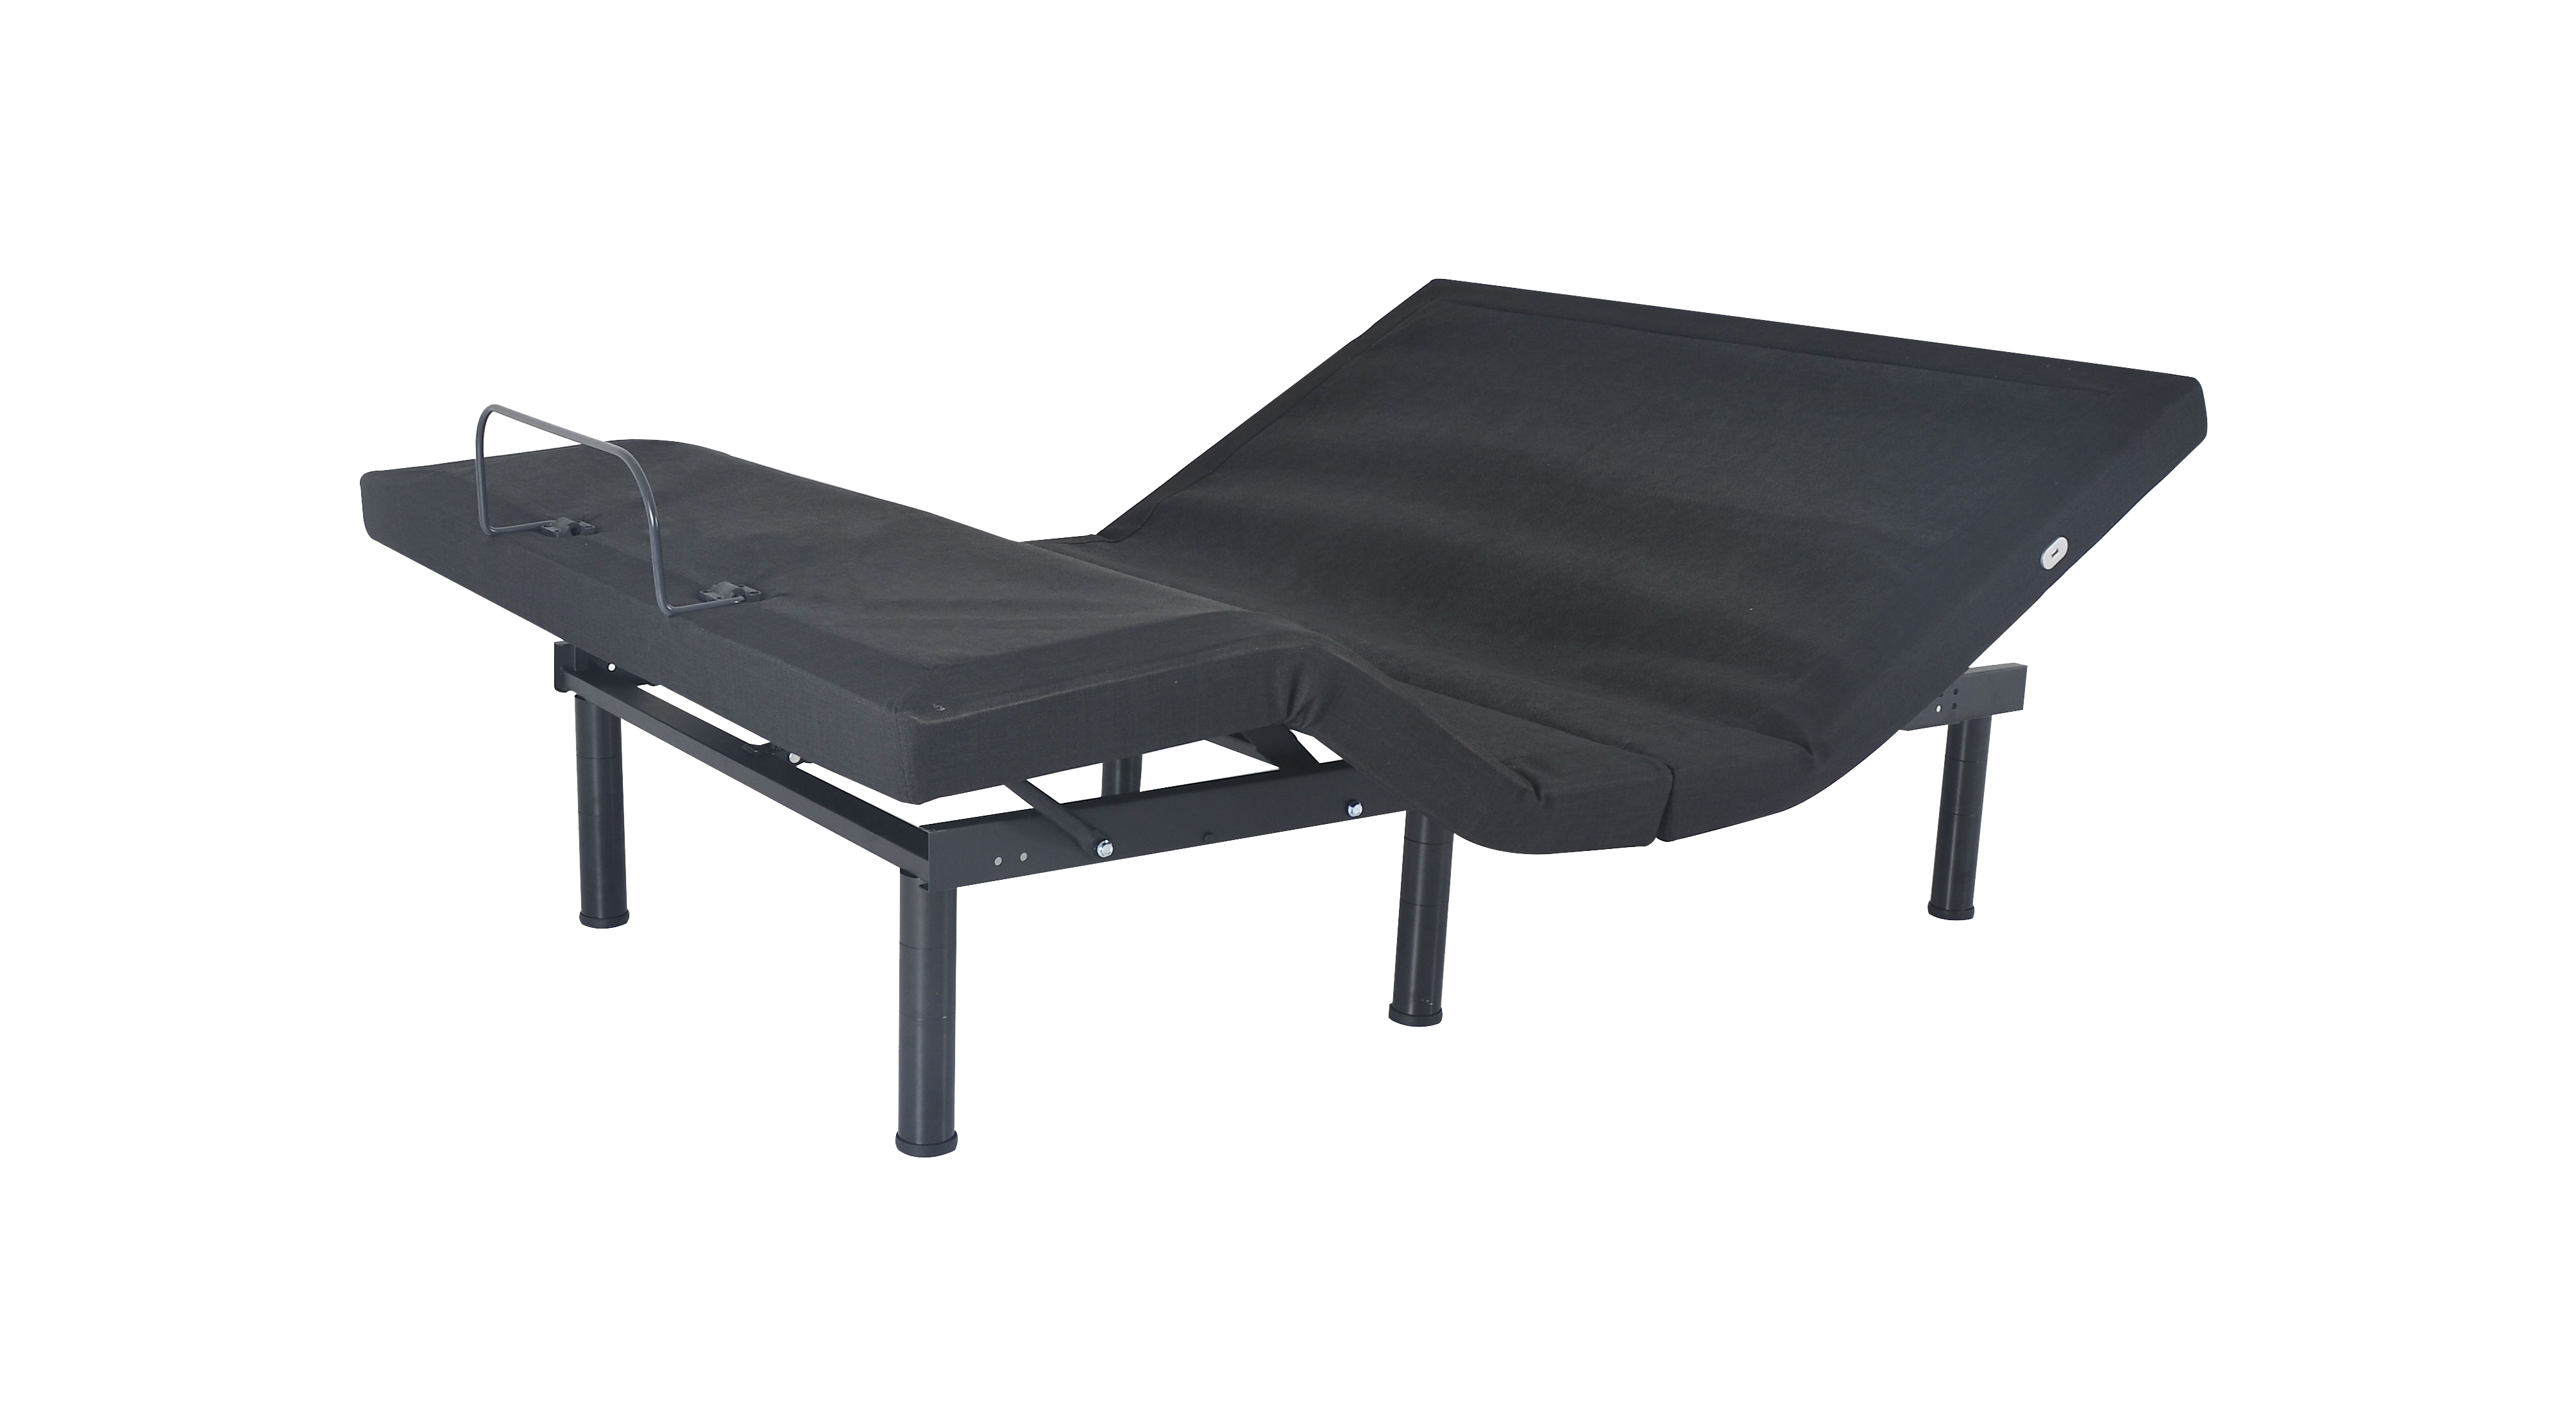 A black NL300U base in an adjusted position with the head and foot of the bed elevated against a white background.